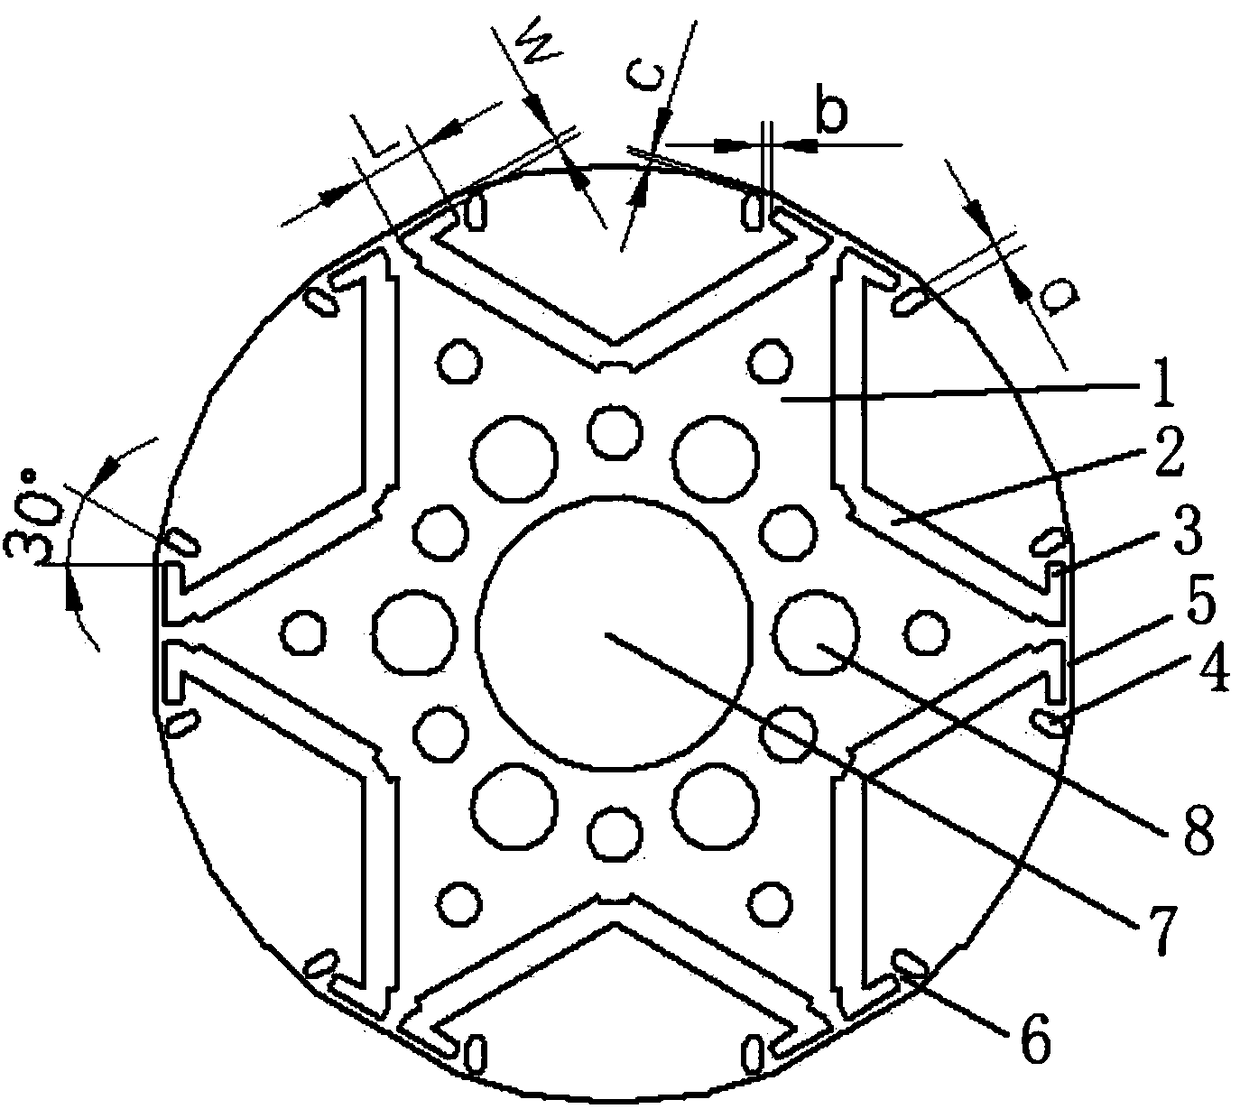 Electric motor rotor, electric motor and direct current variable frequency compressor